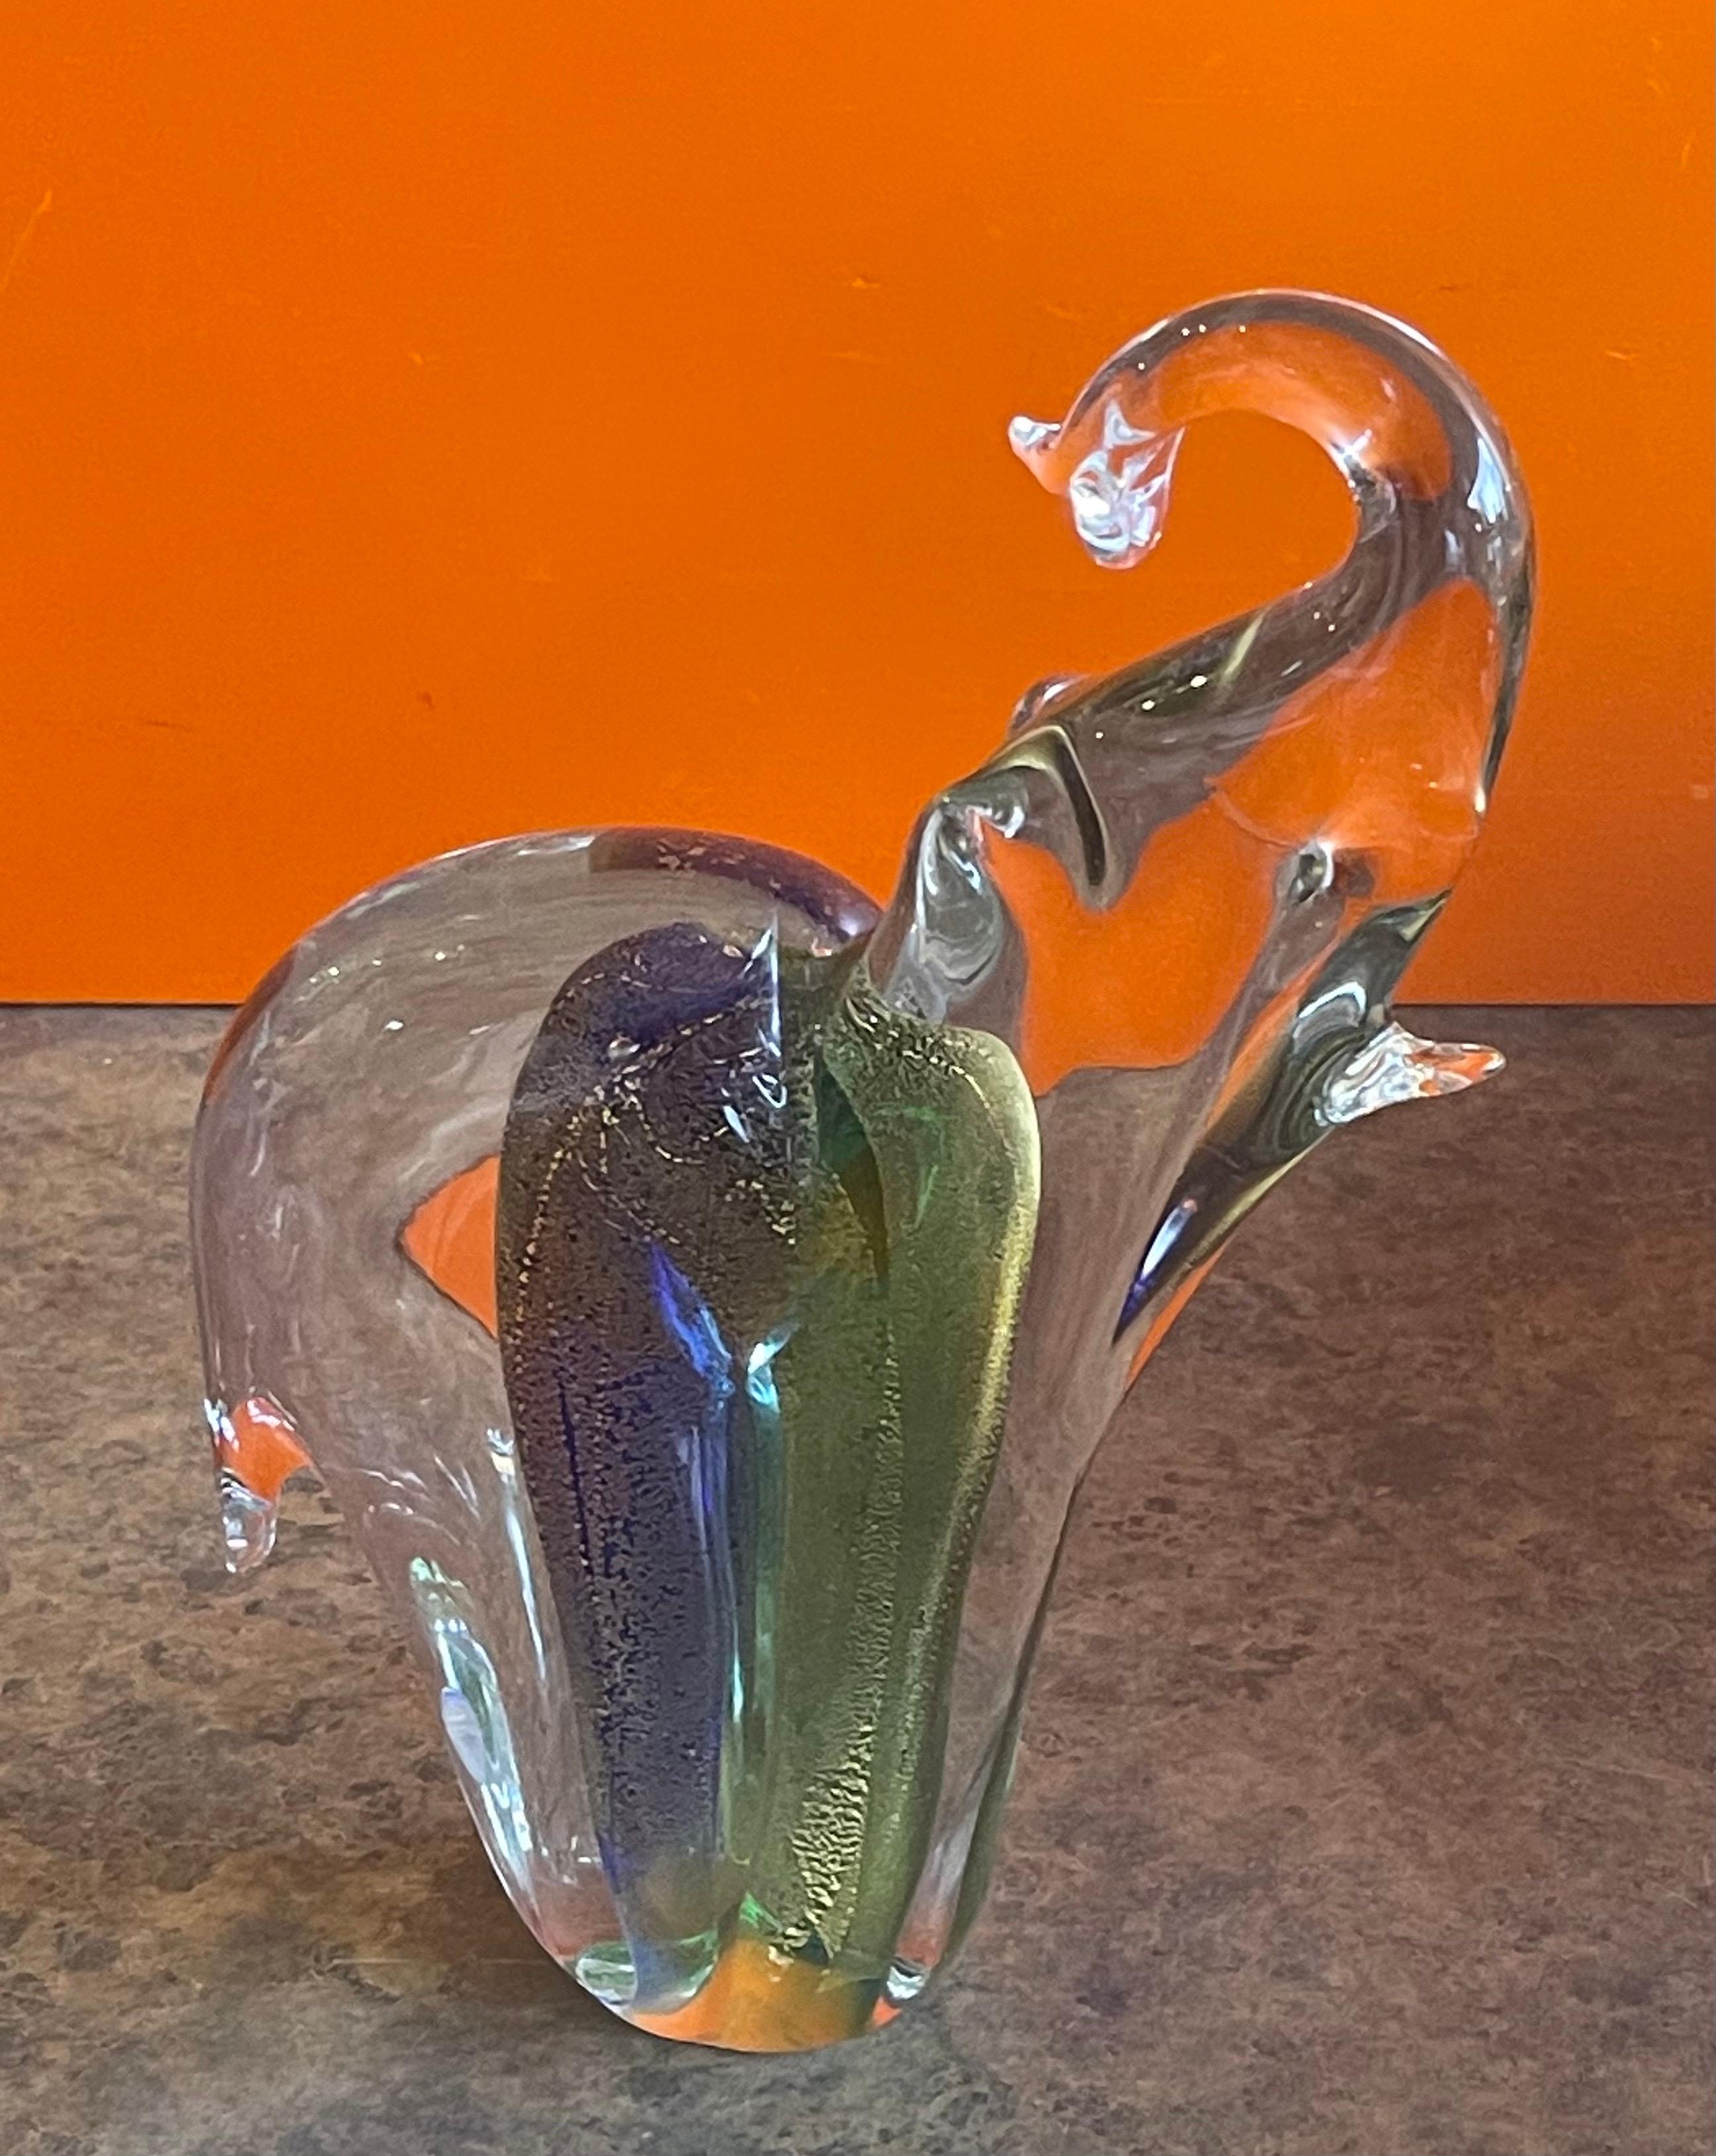 Stylish elephant sommerso art glass sculpture by Murano Glass, circa 1970s. The piece has a wonderful inner blue and green with gold fleck color on a clear glass body. The sculpture is in very good condition with no chips or cracks (some scratches